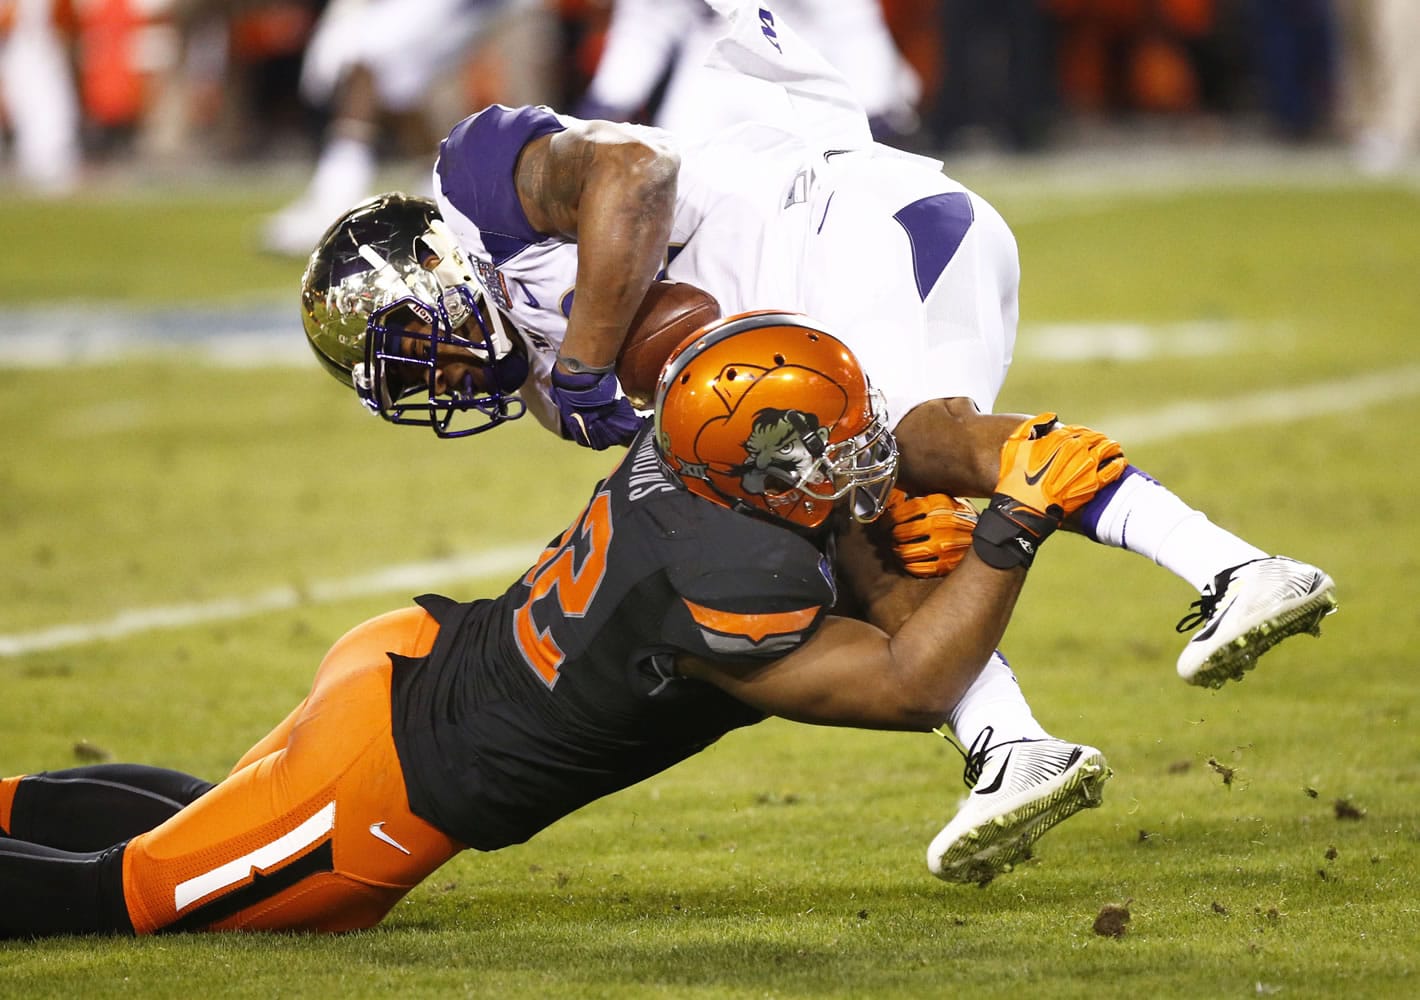 Washington's Dwayne Washington is tackled by Oklahoma State's Ryan Simmons during the Cactus Bowl on Friday, Jan. 2, 2015, in Tempe, Ariz.